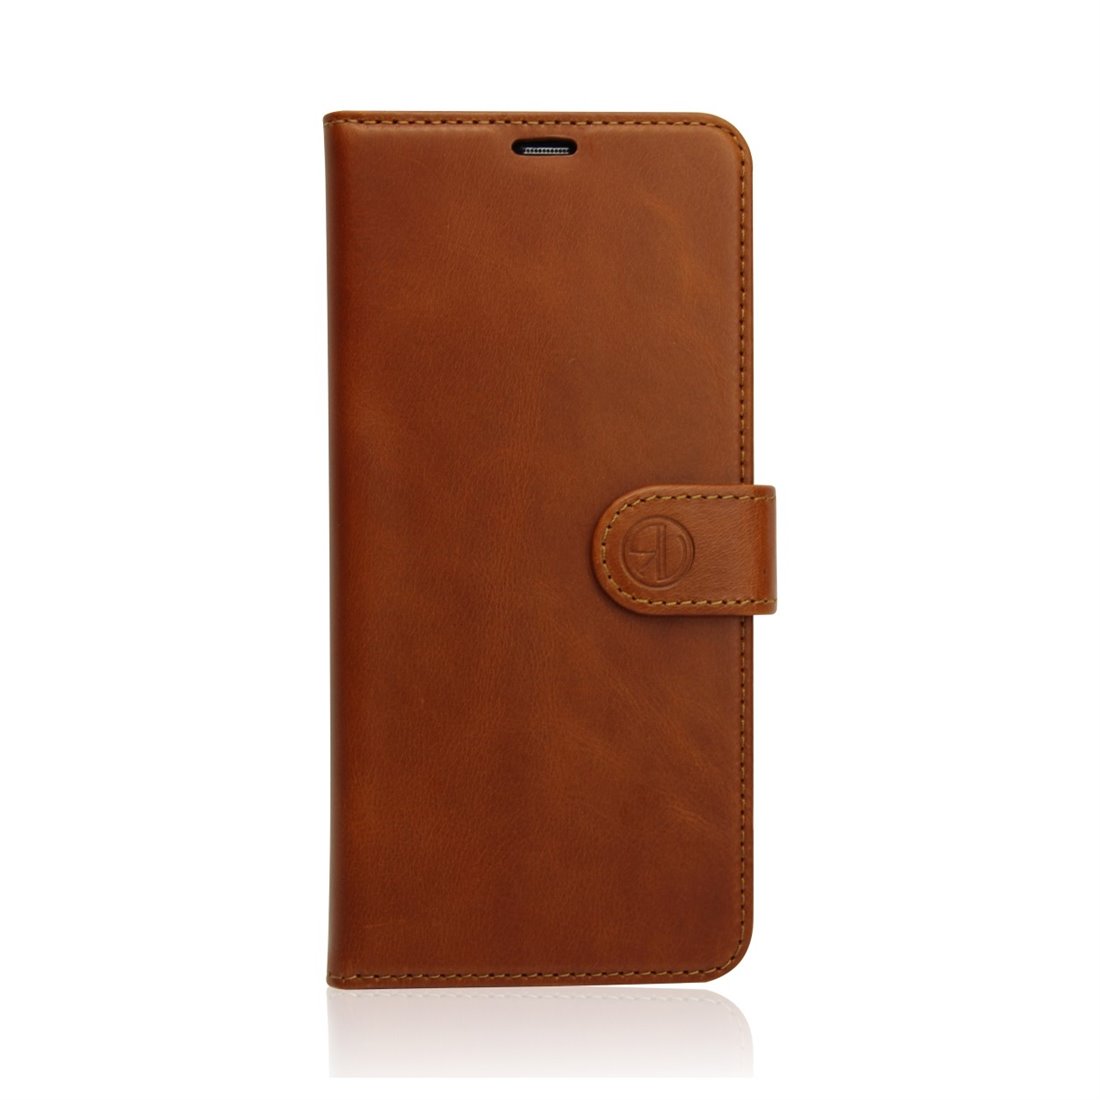 Genuine Leather Book Case iPhone 5G/5S/SE light brown